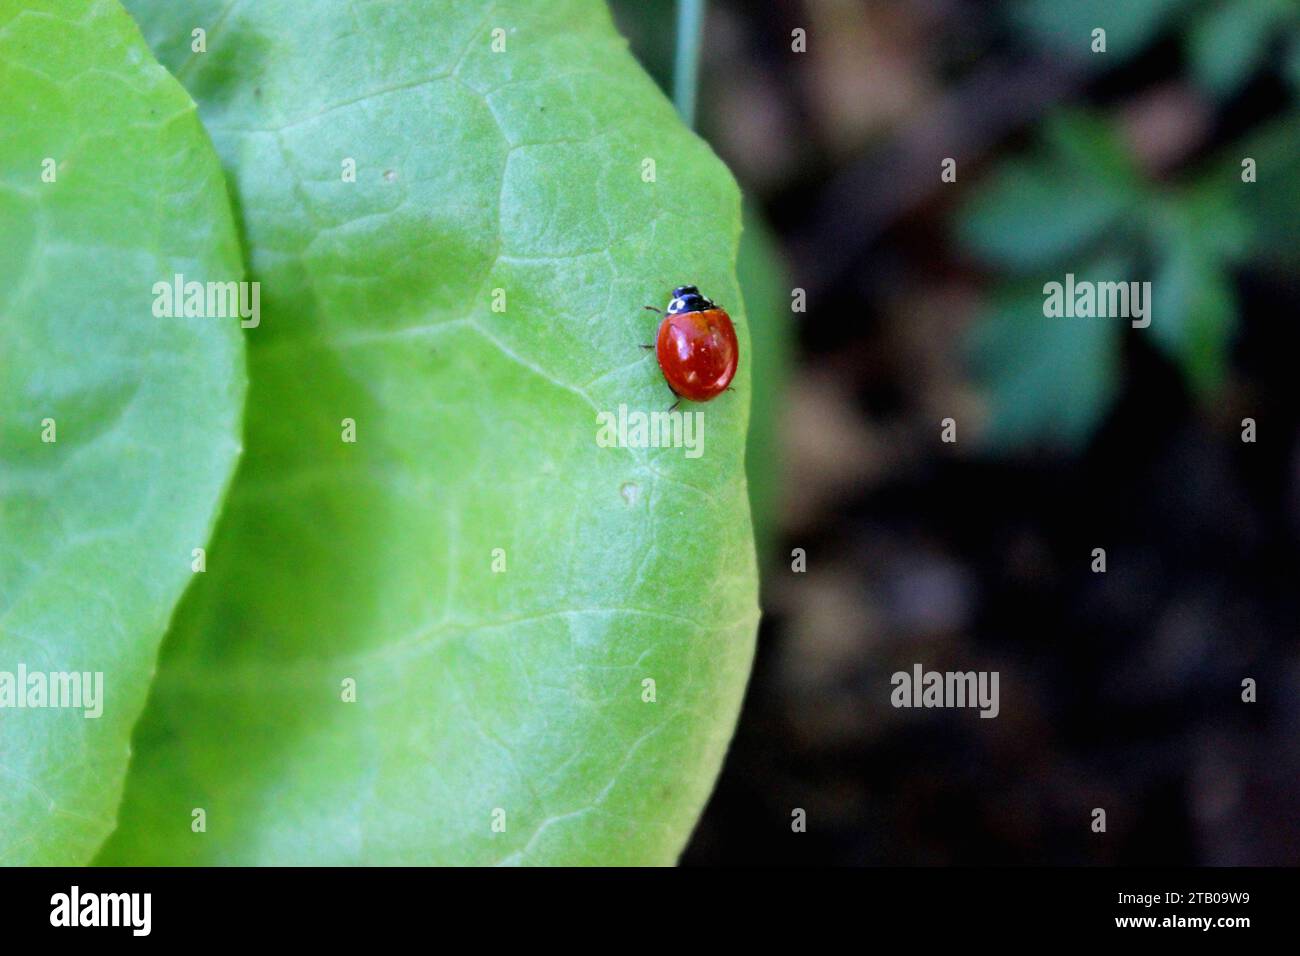 Red ladybug insect, species Cycloneda sanguinea, on the leaf of a lettuce vegetable plant, cooperating in an urban community garden in the city. Stock Photo